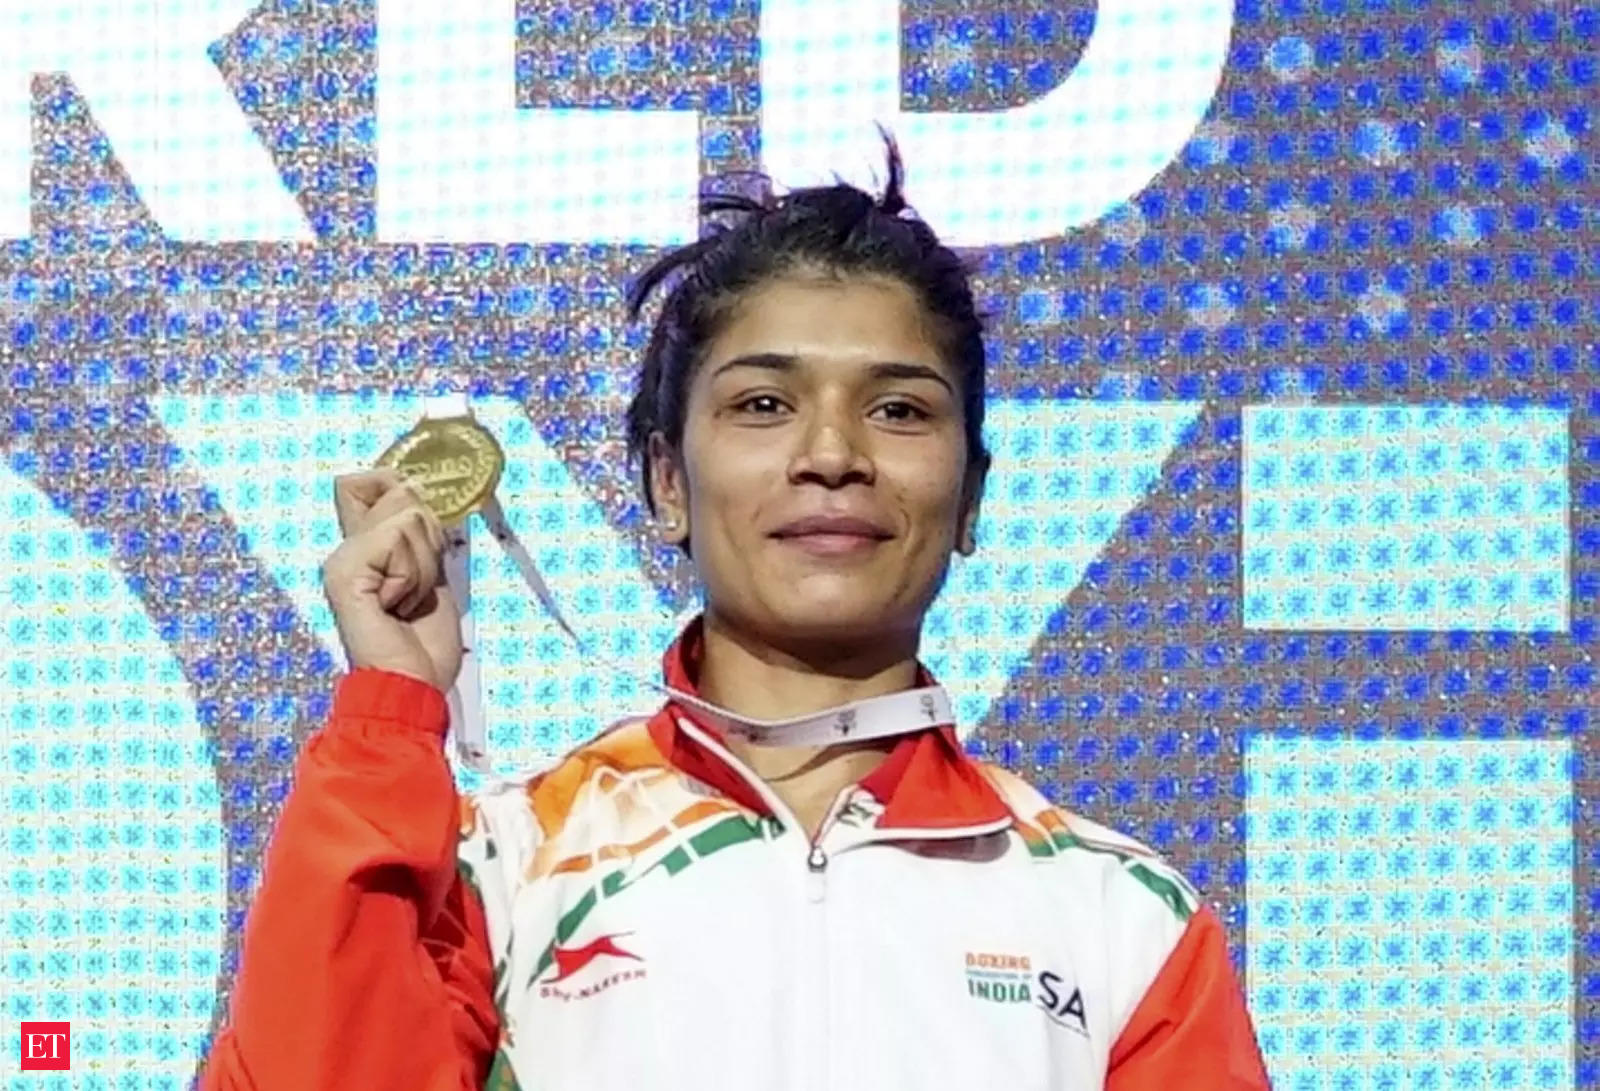 nikhat zareen: My next goal is to enter 50 kg category for upcoming  Commonwealth Games: Nikhat Zareen - The Economic Times